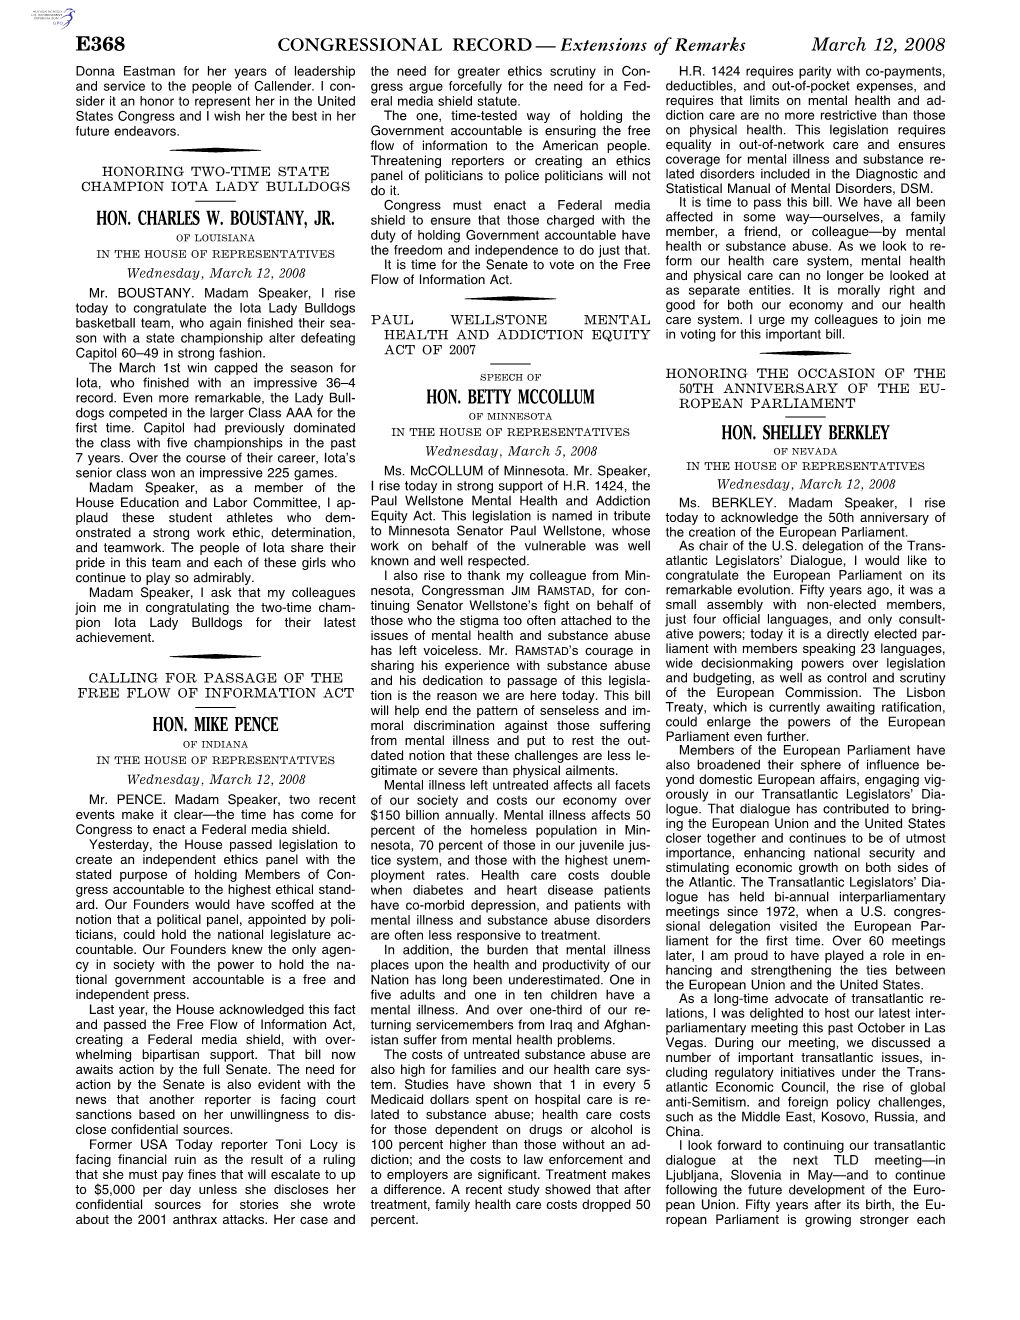 Extensions of Remarks E368 HON. CHARLES W. BOUSTANY, JR